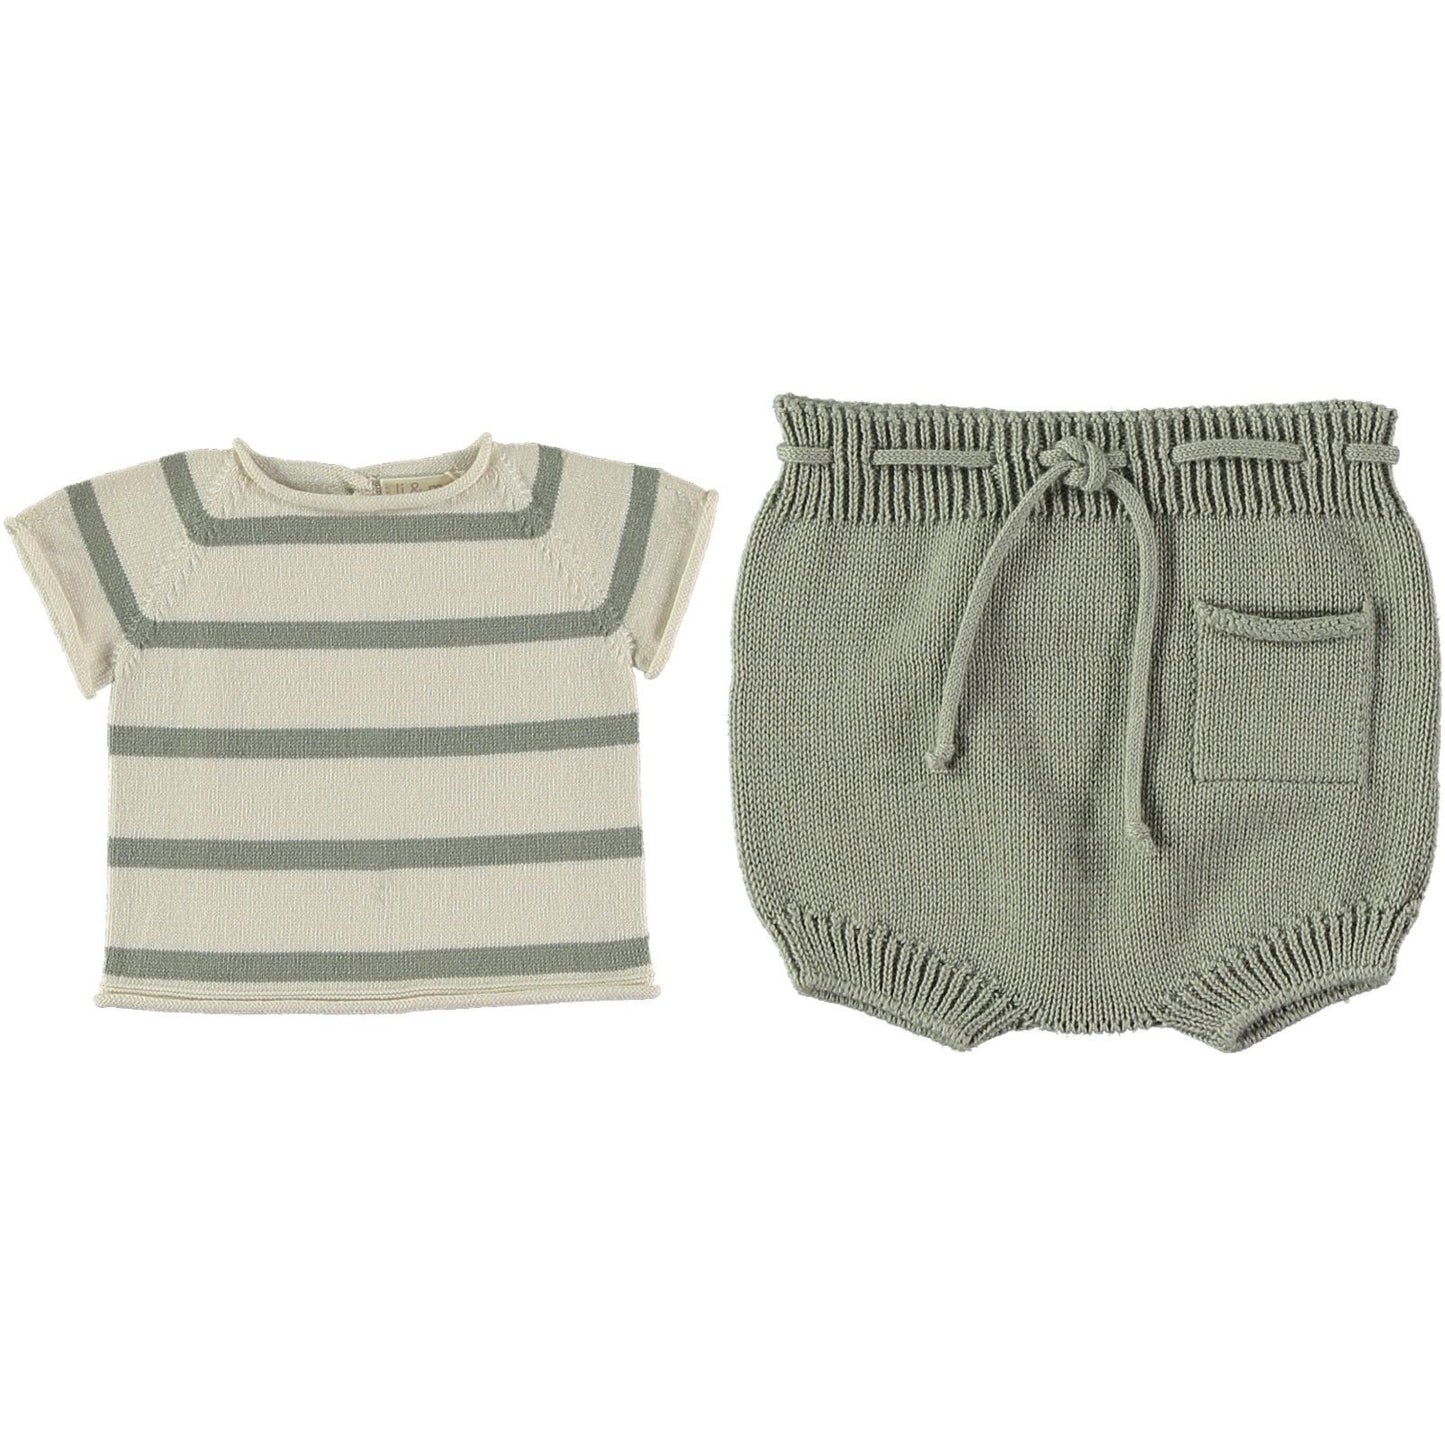 Striped Knit Tee Shirt and Bloomer